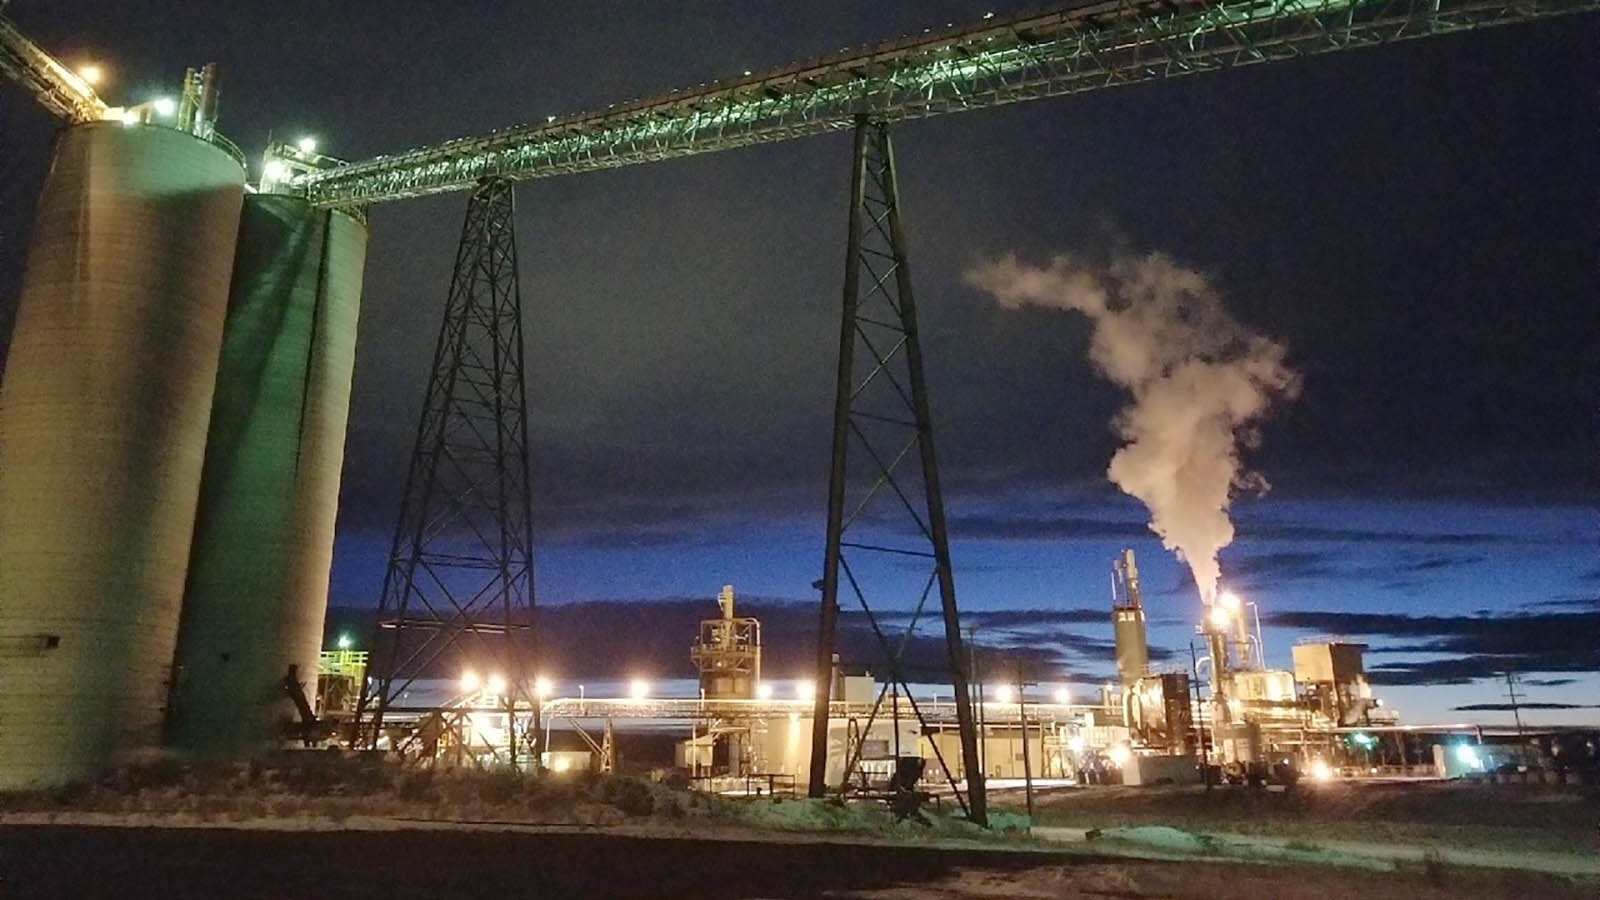 Atlas Carbon in Gillette operates at the former Fort Union mine site in Campbell County, turning Power River Basin coal into activated carbon for filters using a proprietary process.